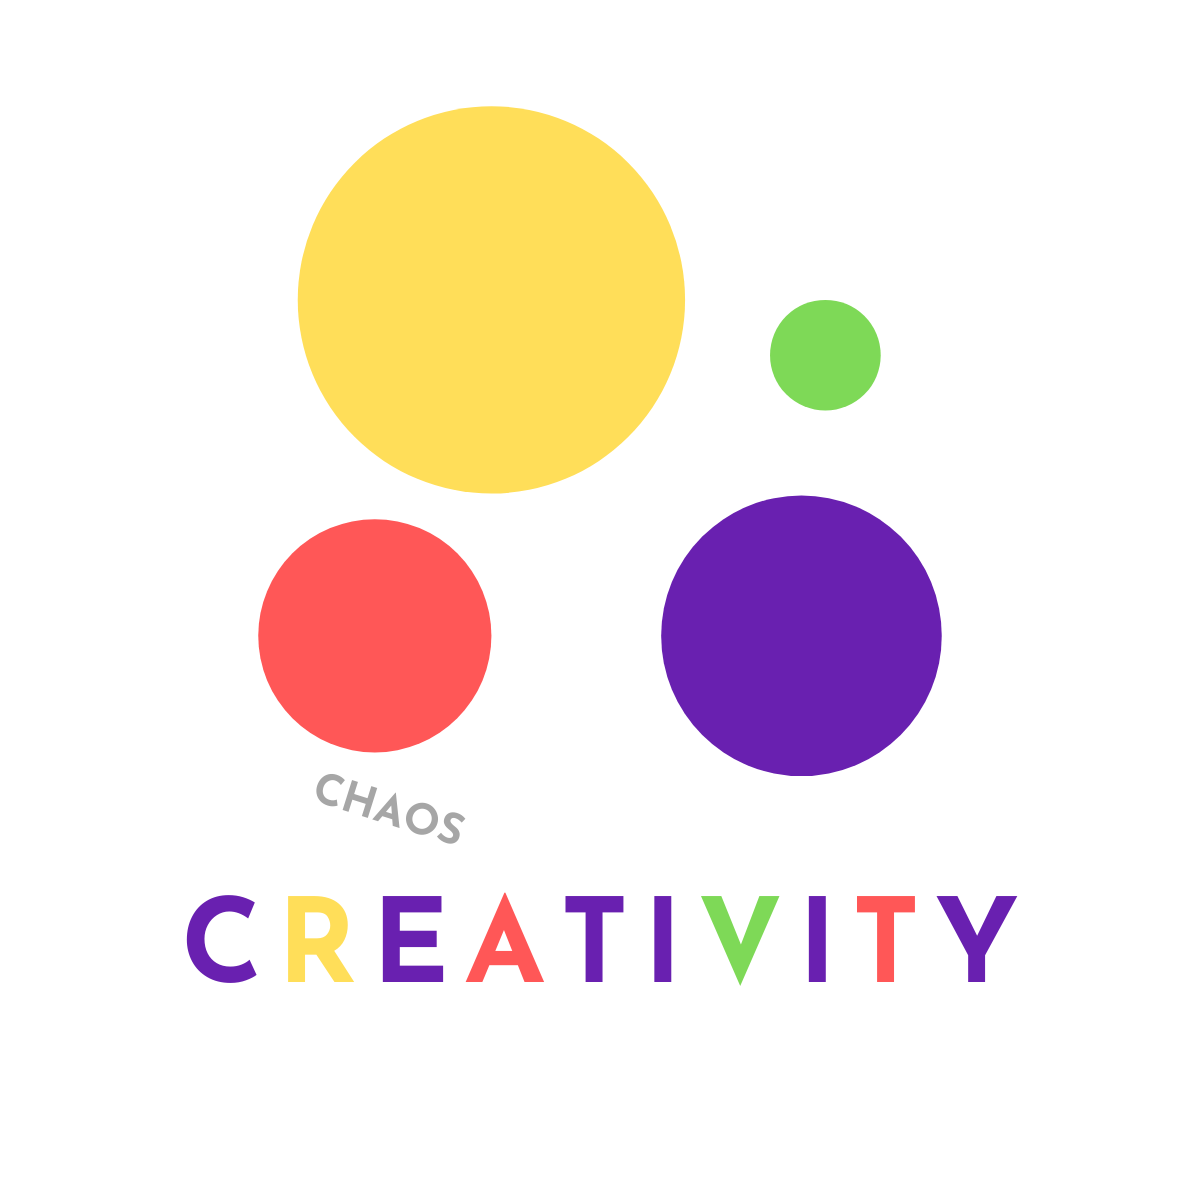 From Chaos to Creativity